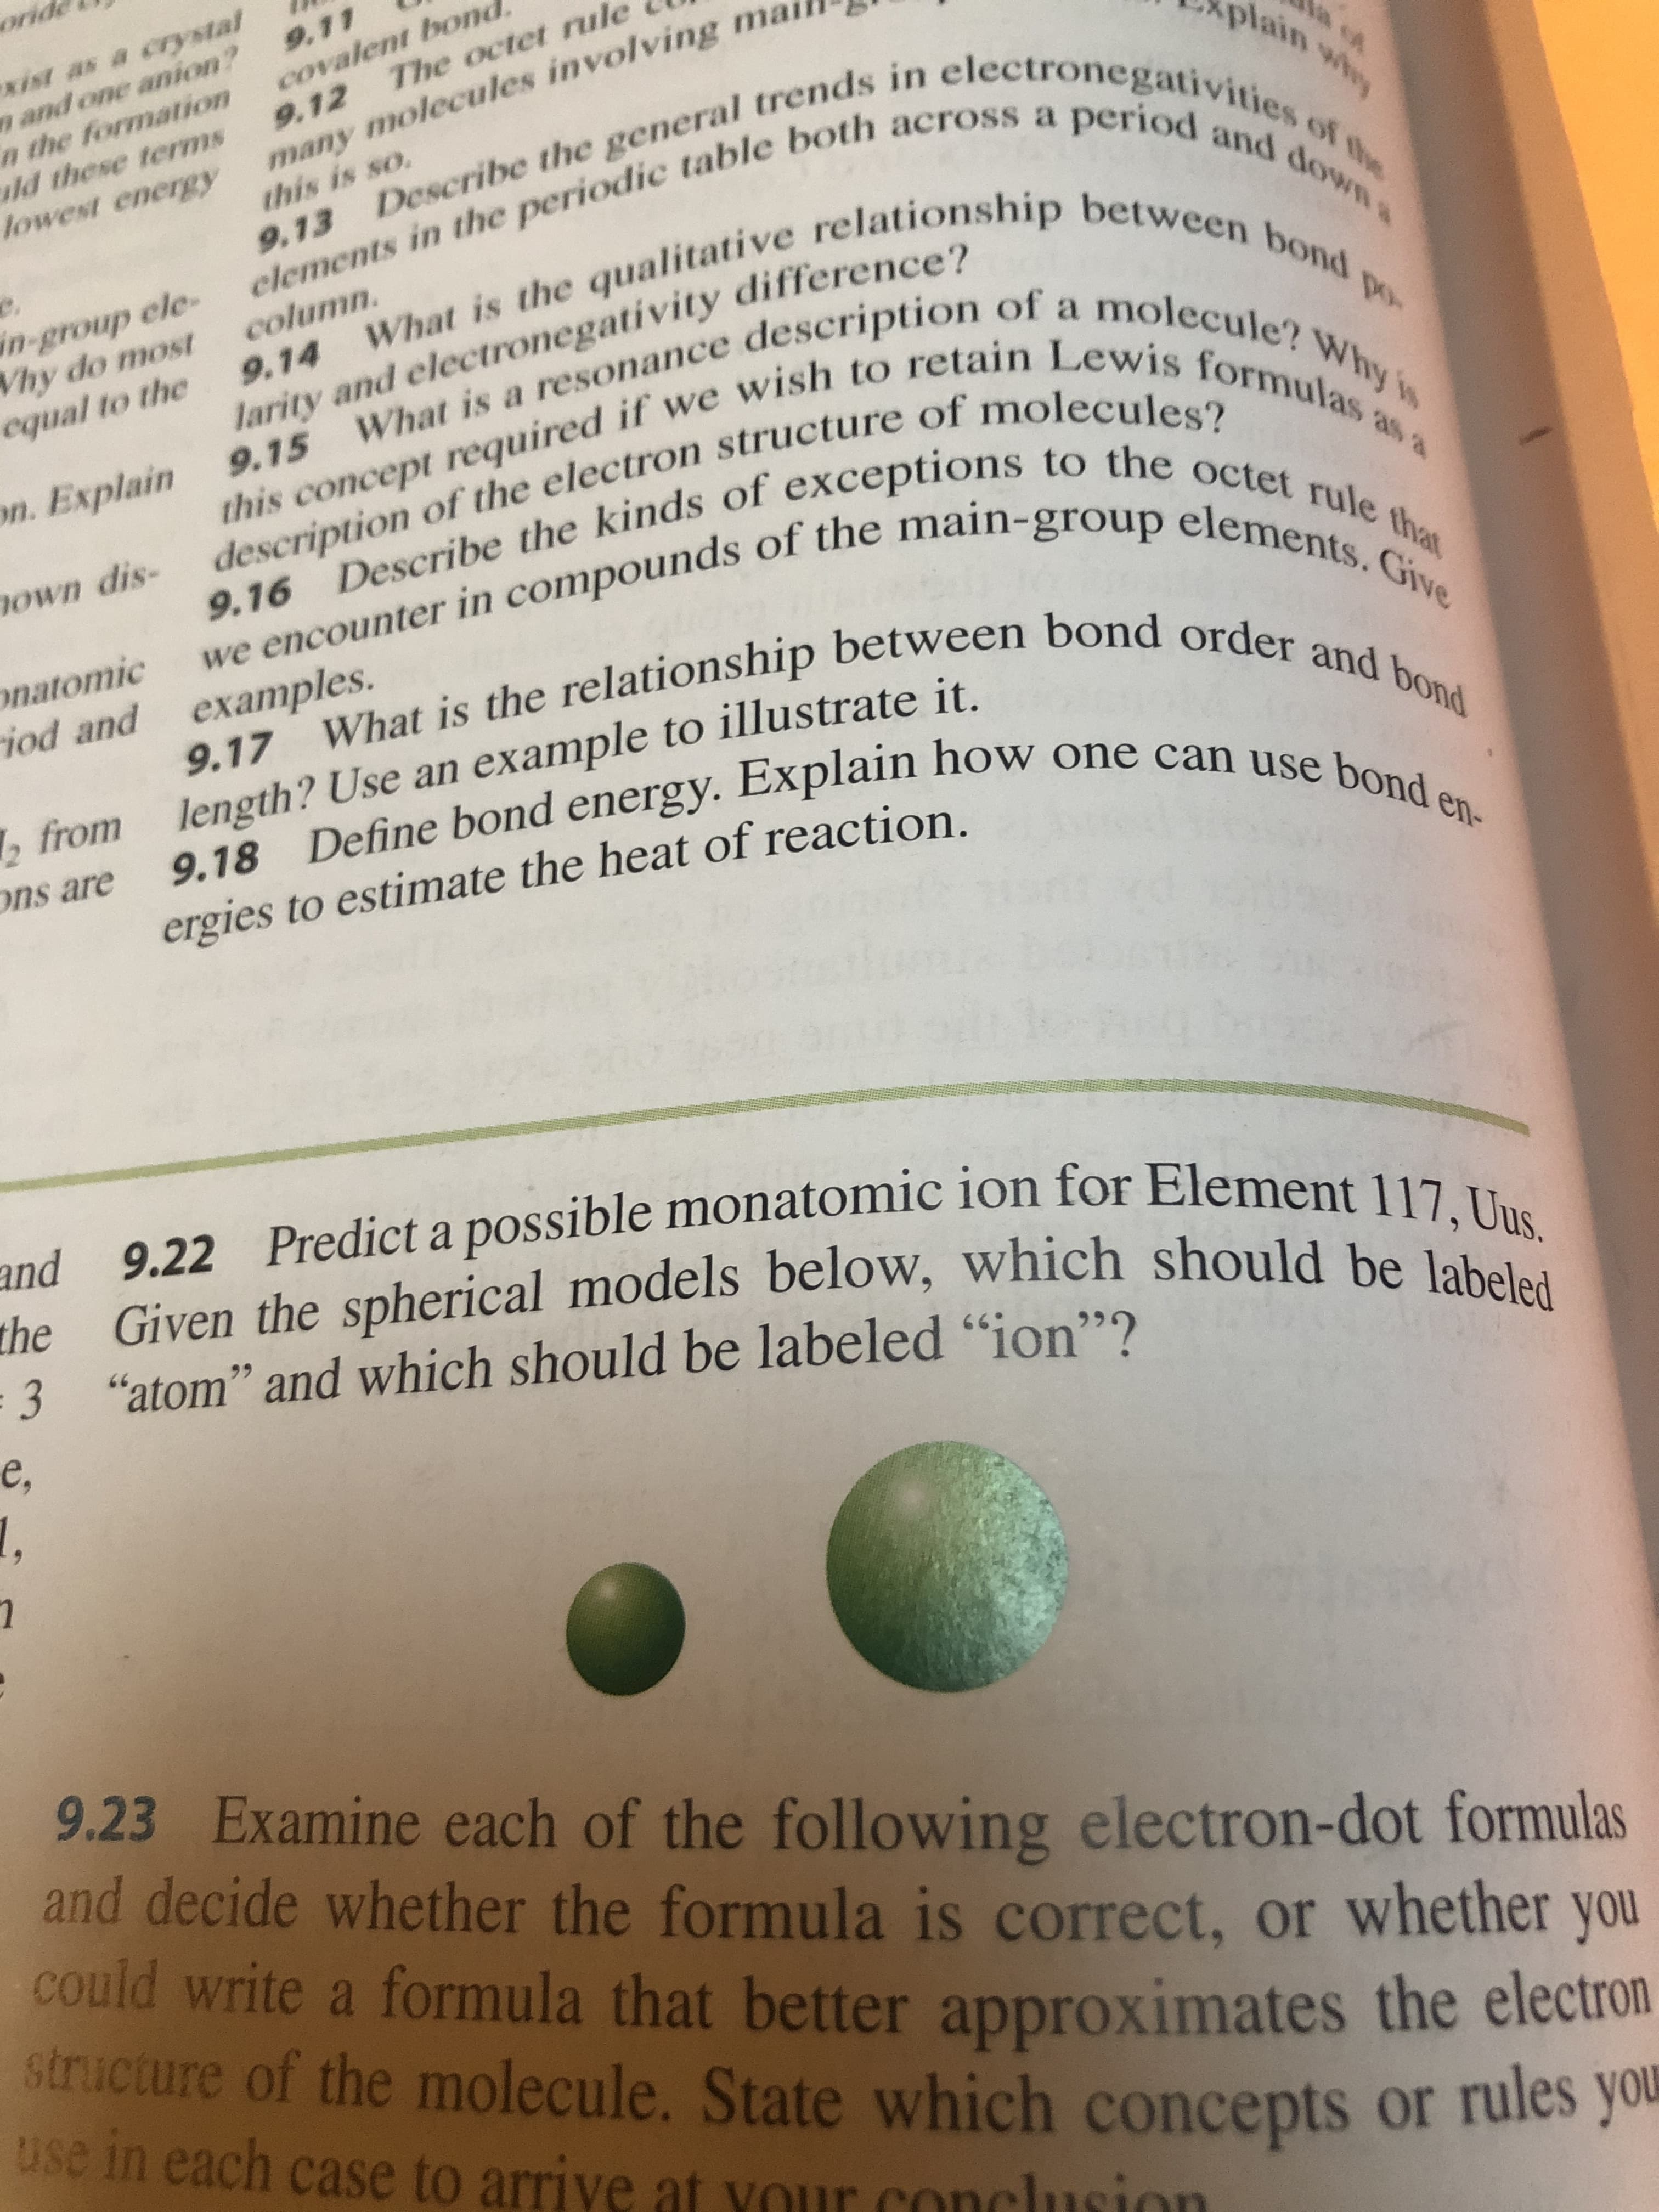 9.22 Predict a possible monatomic ion for Element 117
Given the spherical models below, which should be labeled
"atom" and which should be labeled "ion'"?
